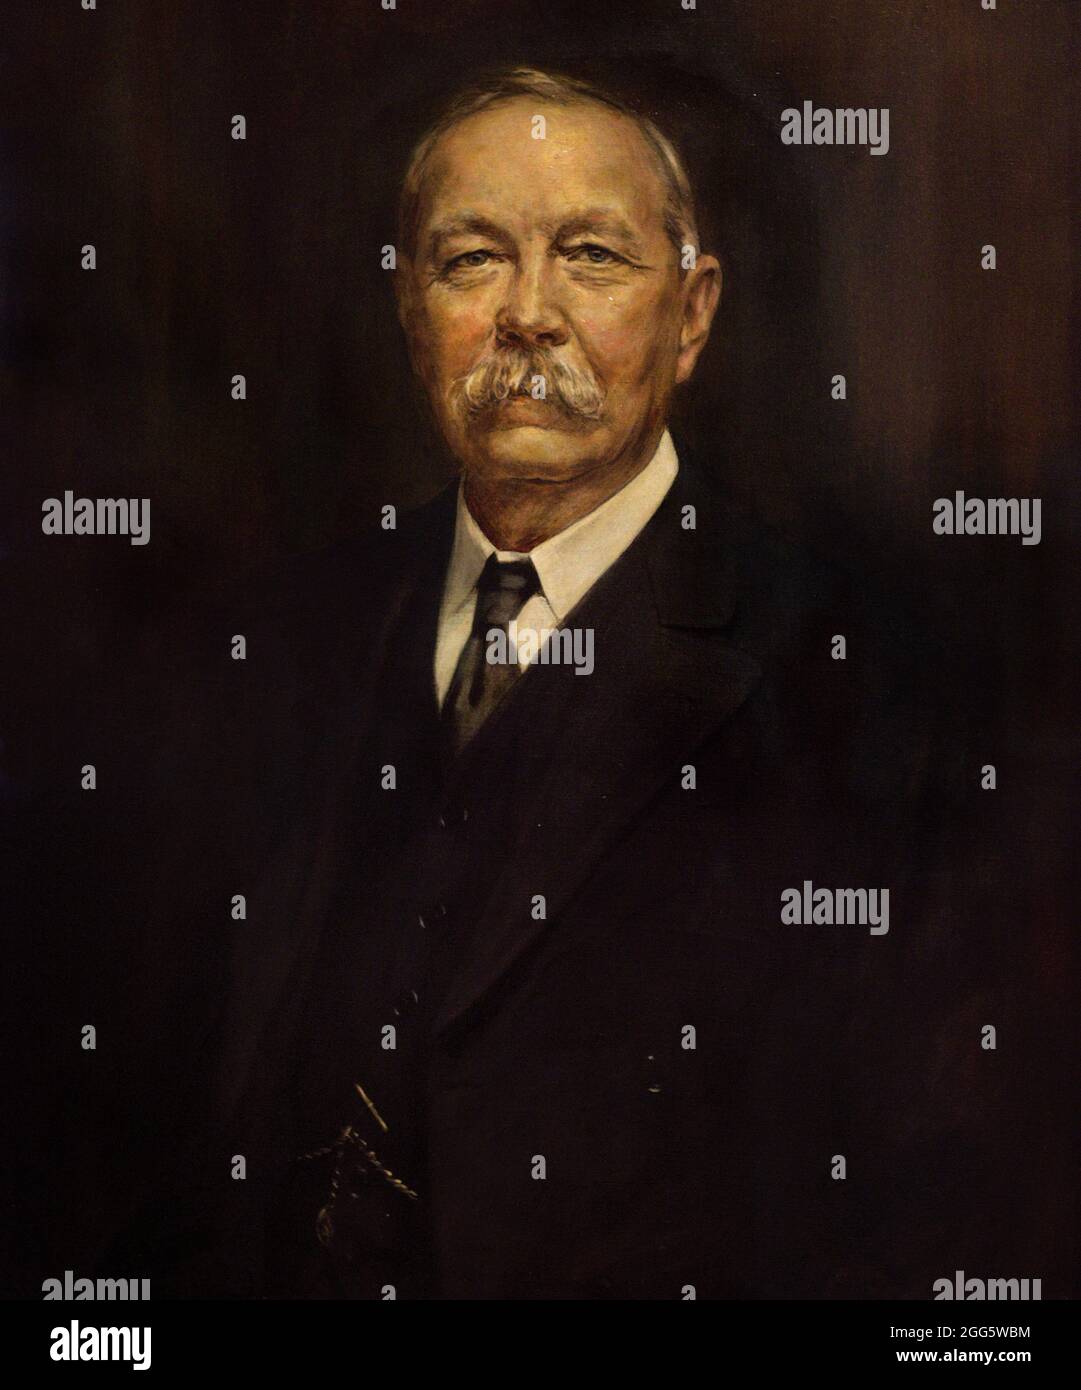 Arthur Conan Doyle (1859-1930). British novelist, creator of the fictional detective Sherlock Holmes. Portrait by Henry L. Gates, active between 1927 and 1941. Oil on canvas (73,7 x 62,2 cm), 1927. National Portrait Gallery. London, England, United Kingdom. Stock Photo